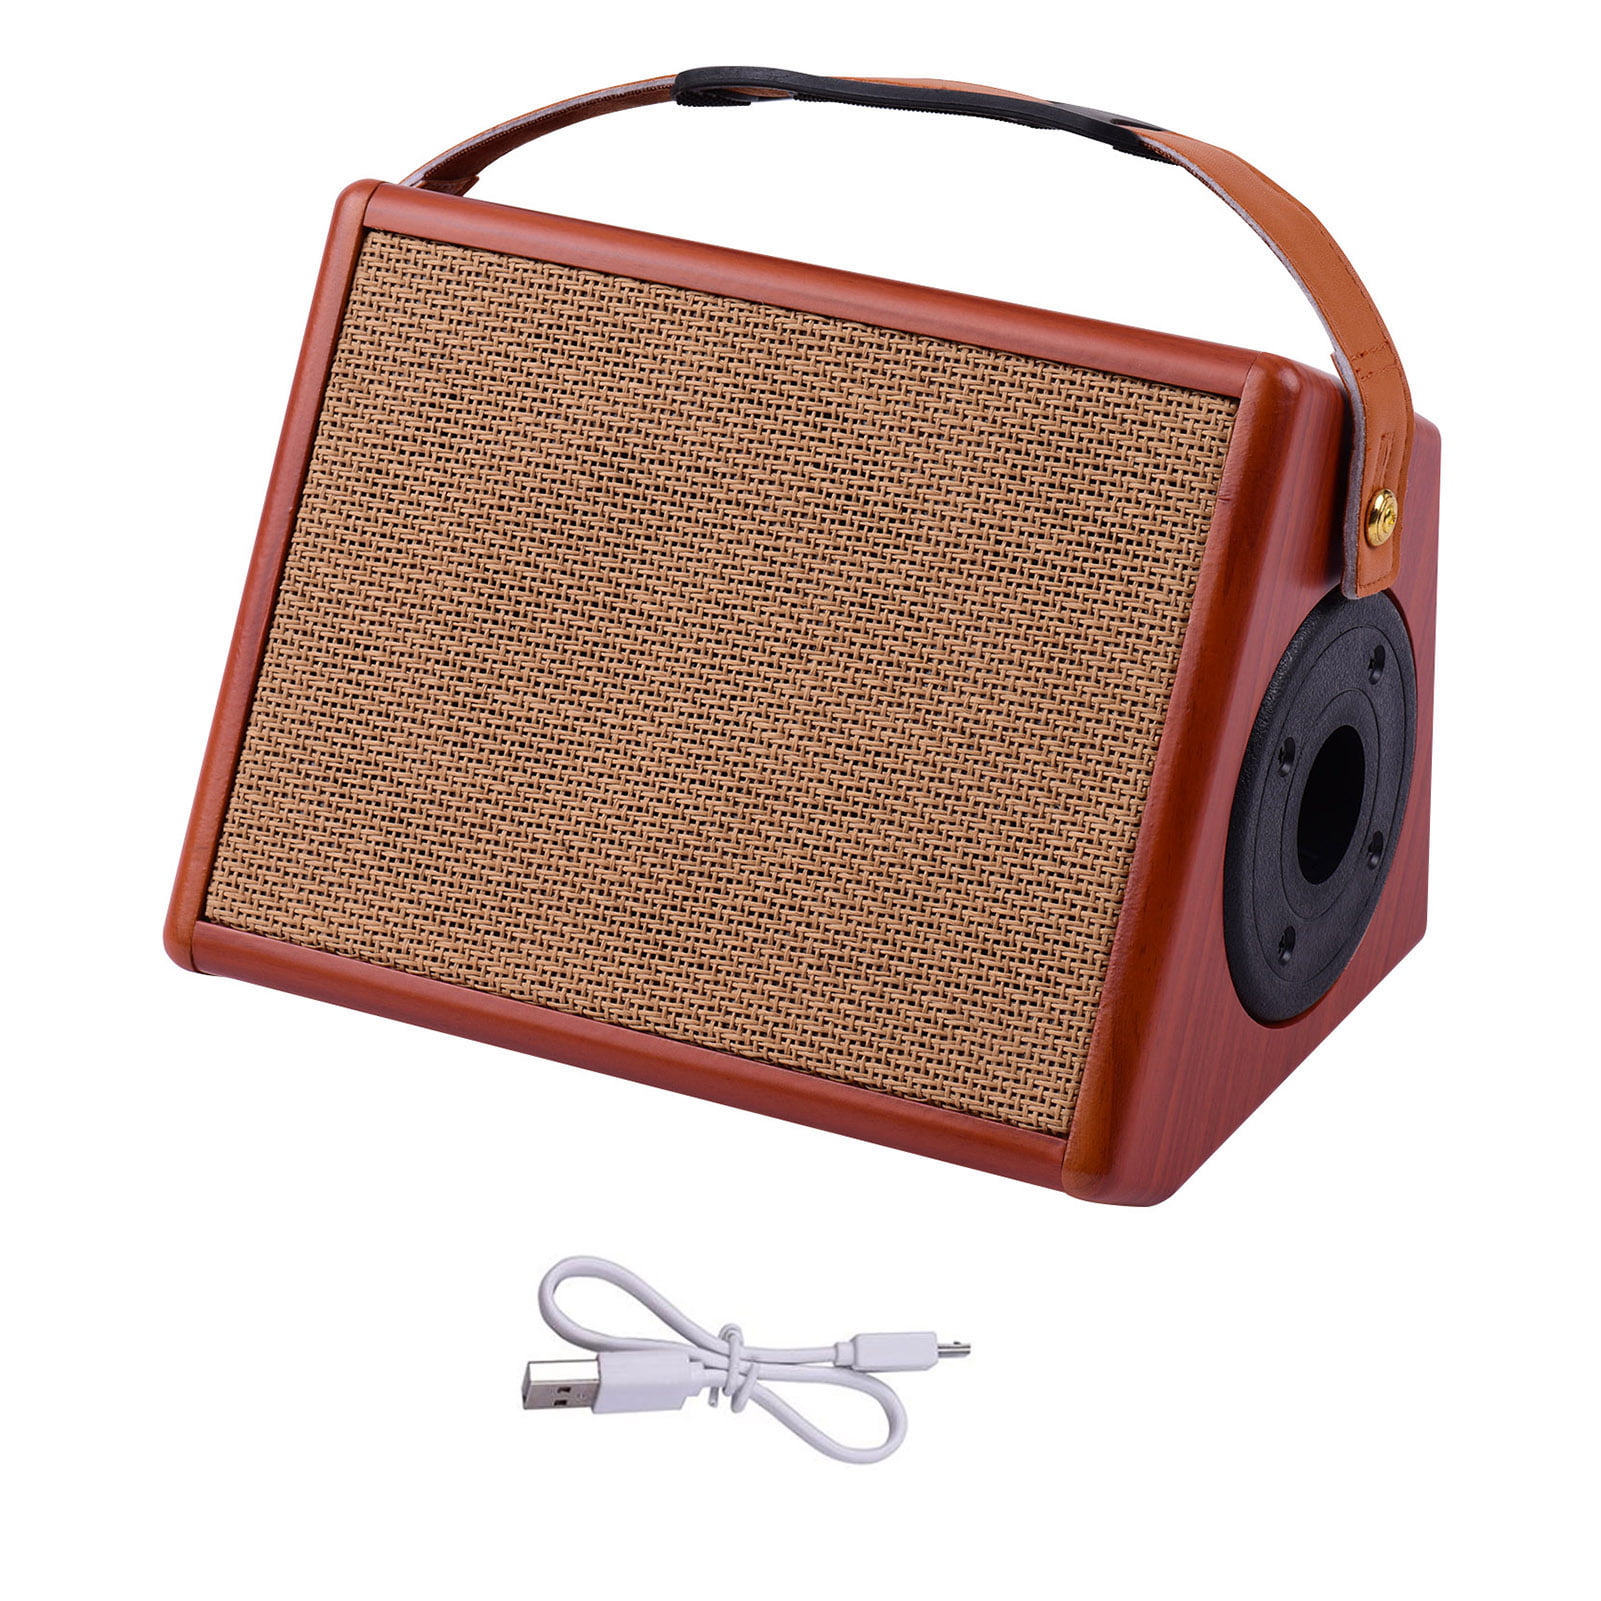 Acoustic Guitar Amplifier 30 Watt Bluetooth Speaker Rechargeable Portable Amp with Microphone Input Supports Volume Bass Treble Control Reverb Chorus Effect White